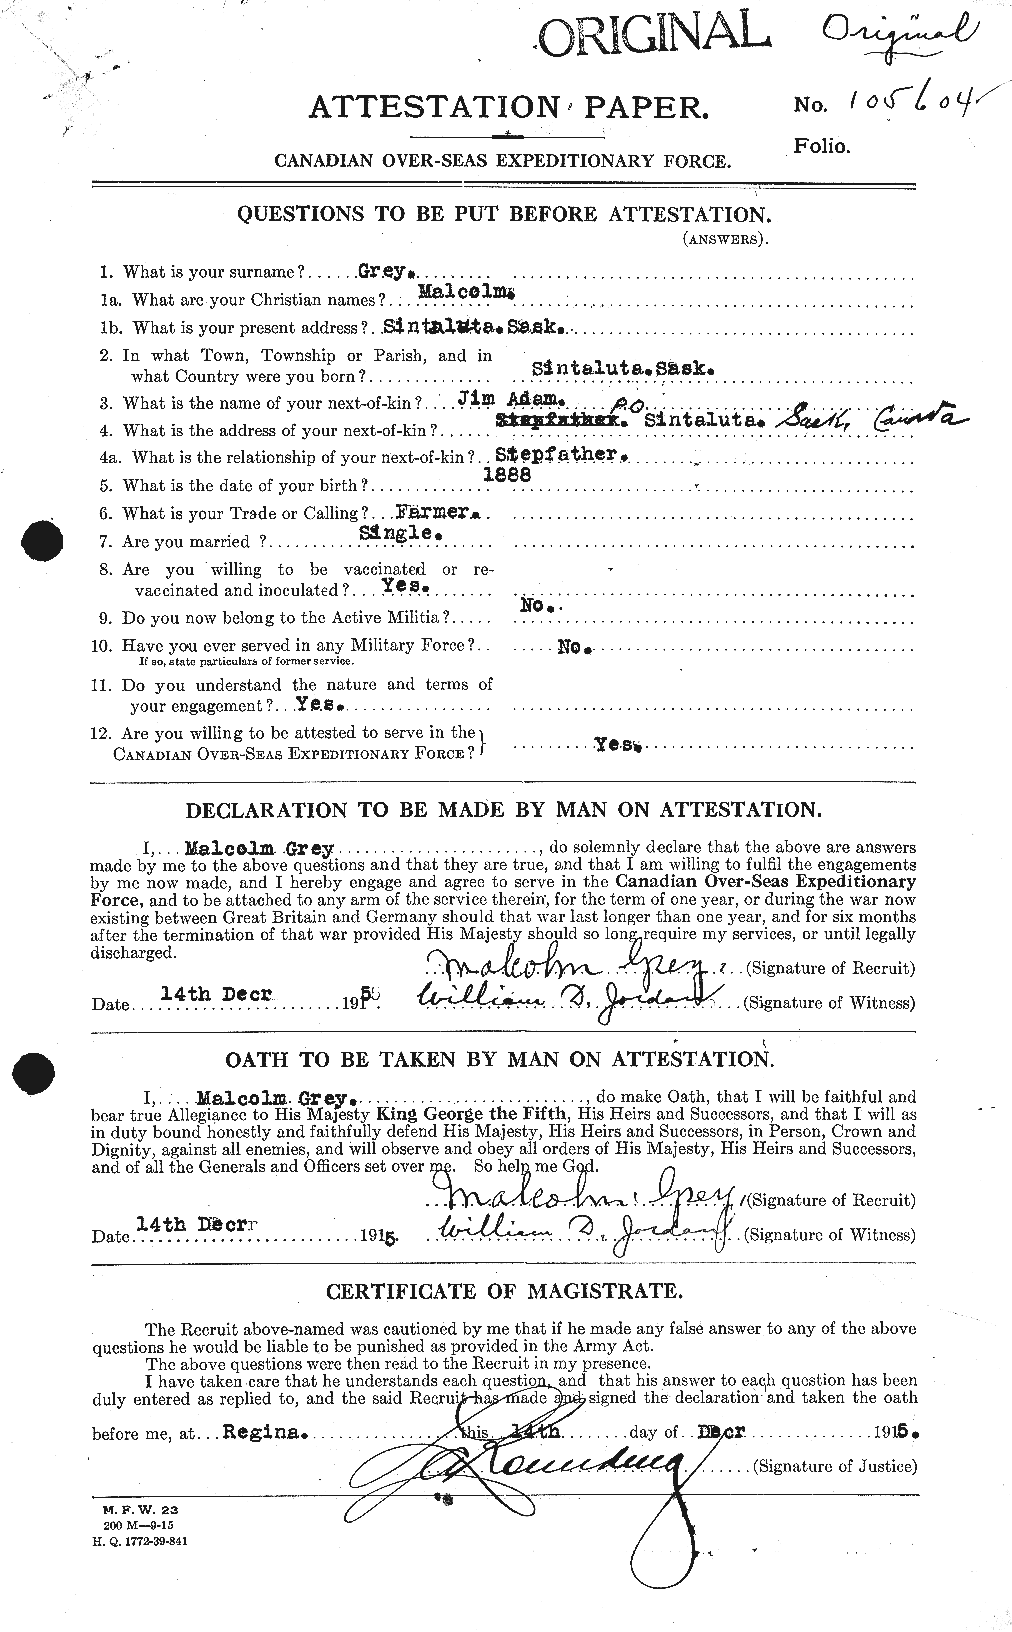 Personnel Records of the First World War - CEF 364013a